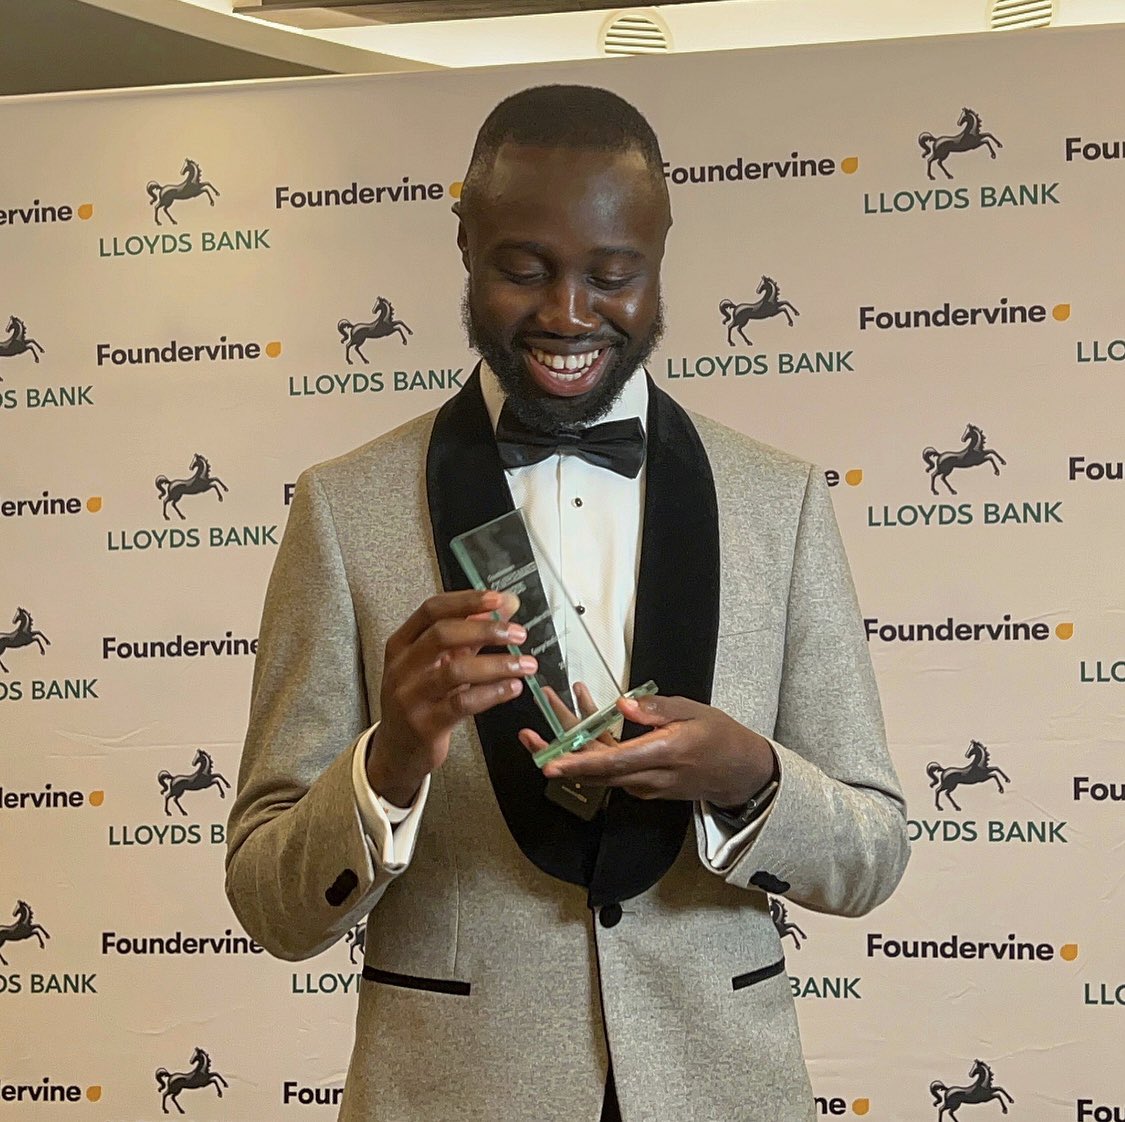 Huge thanks to @foundervine and @LloydsBank for the recognition. Chuffed to have won the ‘Changemaker of the Year Award’!! 🤯🙌🏾🏆 To truly transform anything, it takes a village so THANK YOU, and God for continuing to use me 🙏🏾 The marathon continues! 🏁 #TheKidFromPeckham